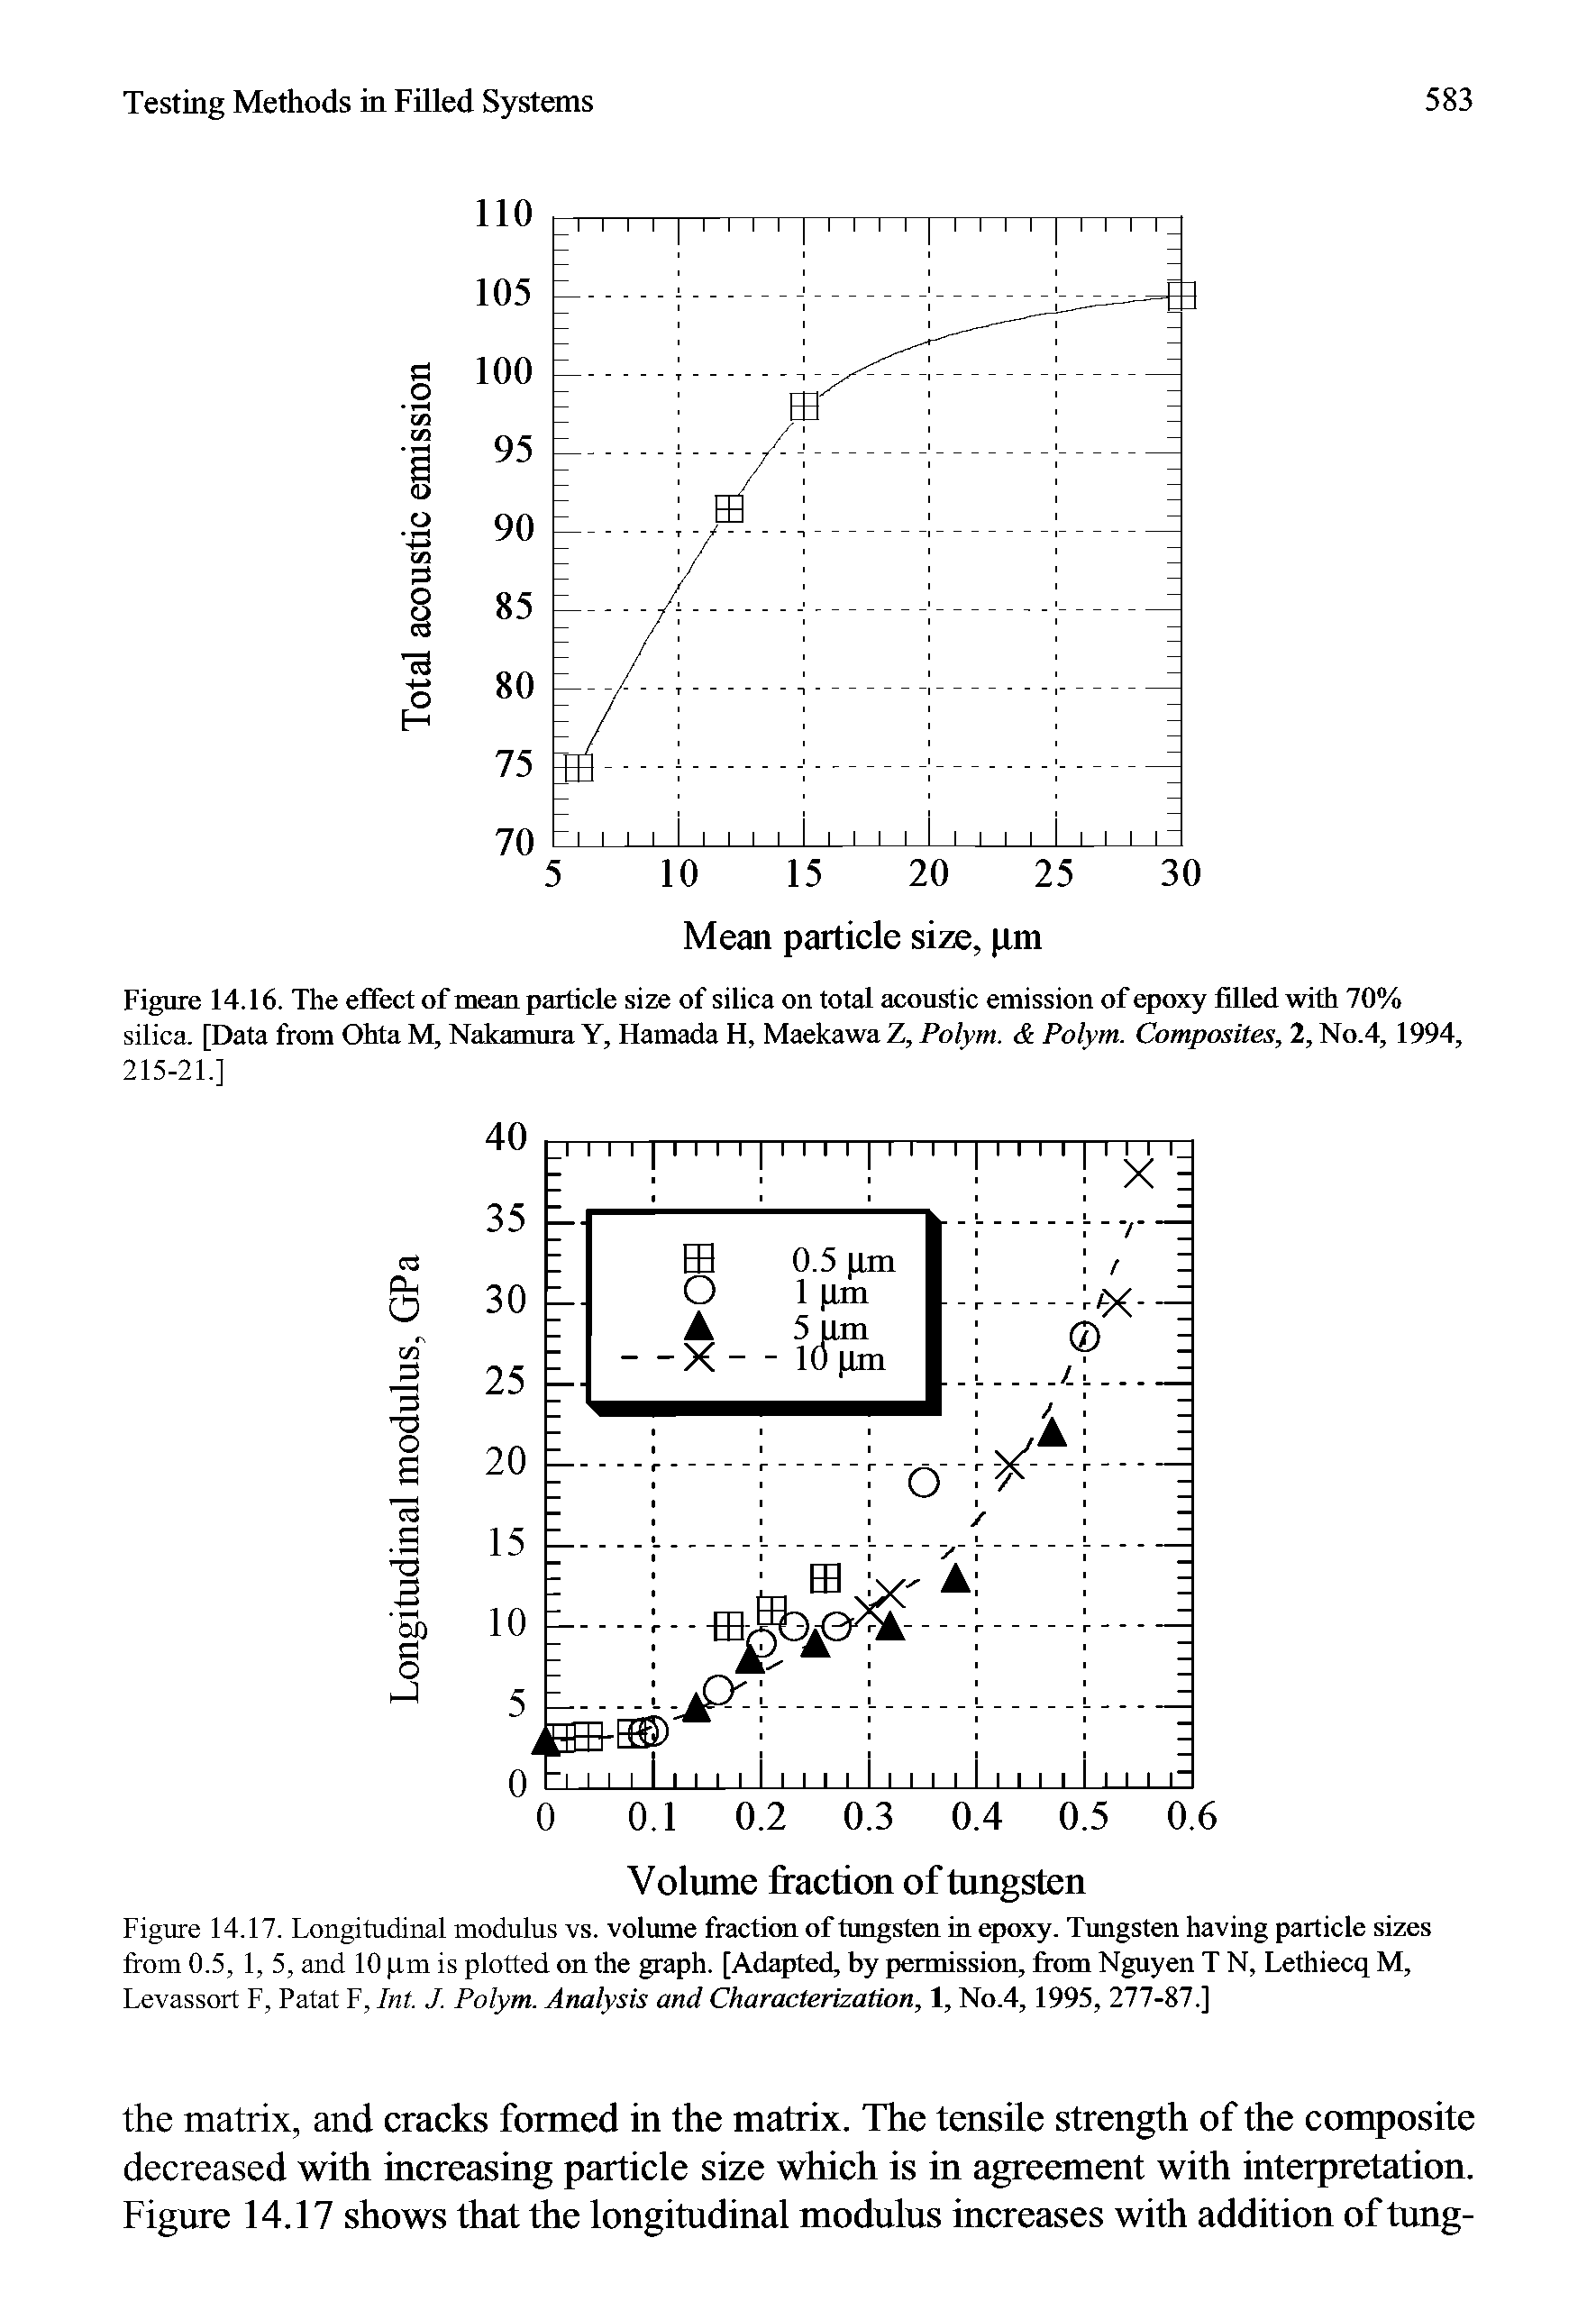 Figure 14.17. Longitudinal modulus vs. volume fraction of tungsten in epoxy. Tungsten having particle sizes from 0.5, 1, 5, and 10 xni is plotted on the graph. [Adapted, by pennission, from Nguyen T N, Lethiecq M, Levassort F, Patat F, Int. J. Polym. Analysis and Characterization, 1, No.4, 1995, 277-87.]...